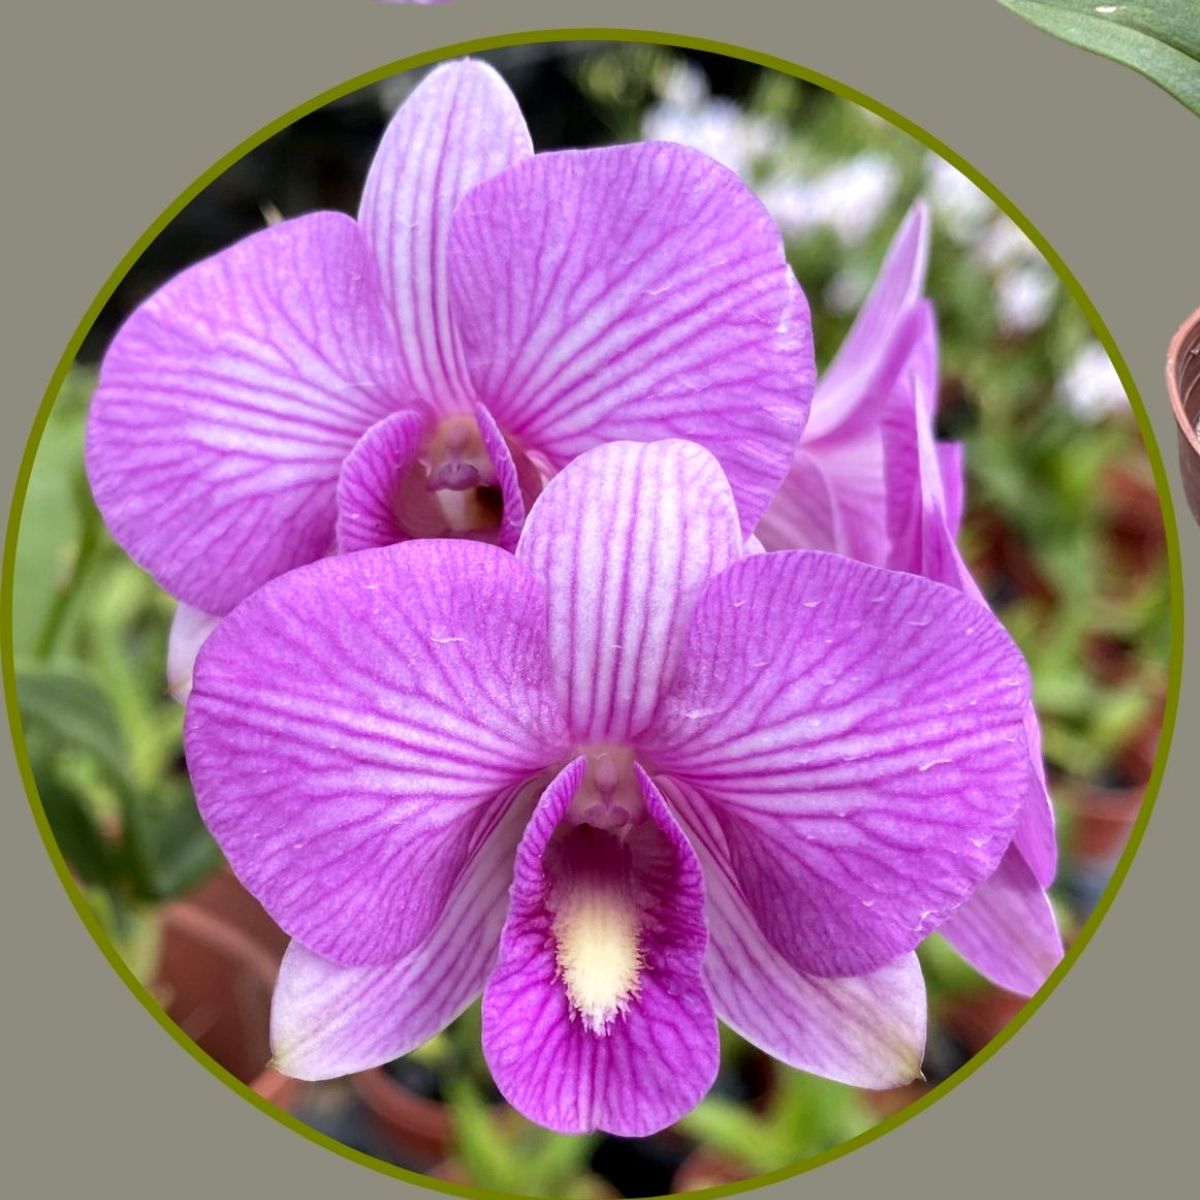 Dendrobium Airy Fancy Pink Orchid - Delicate Pink Blooms and Graceful Petals for a Captivating Floral Display